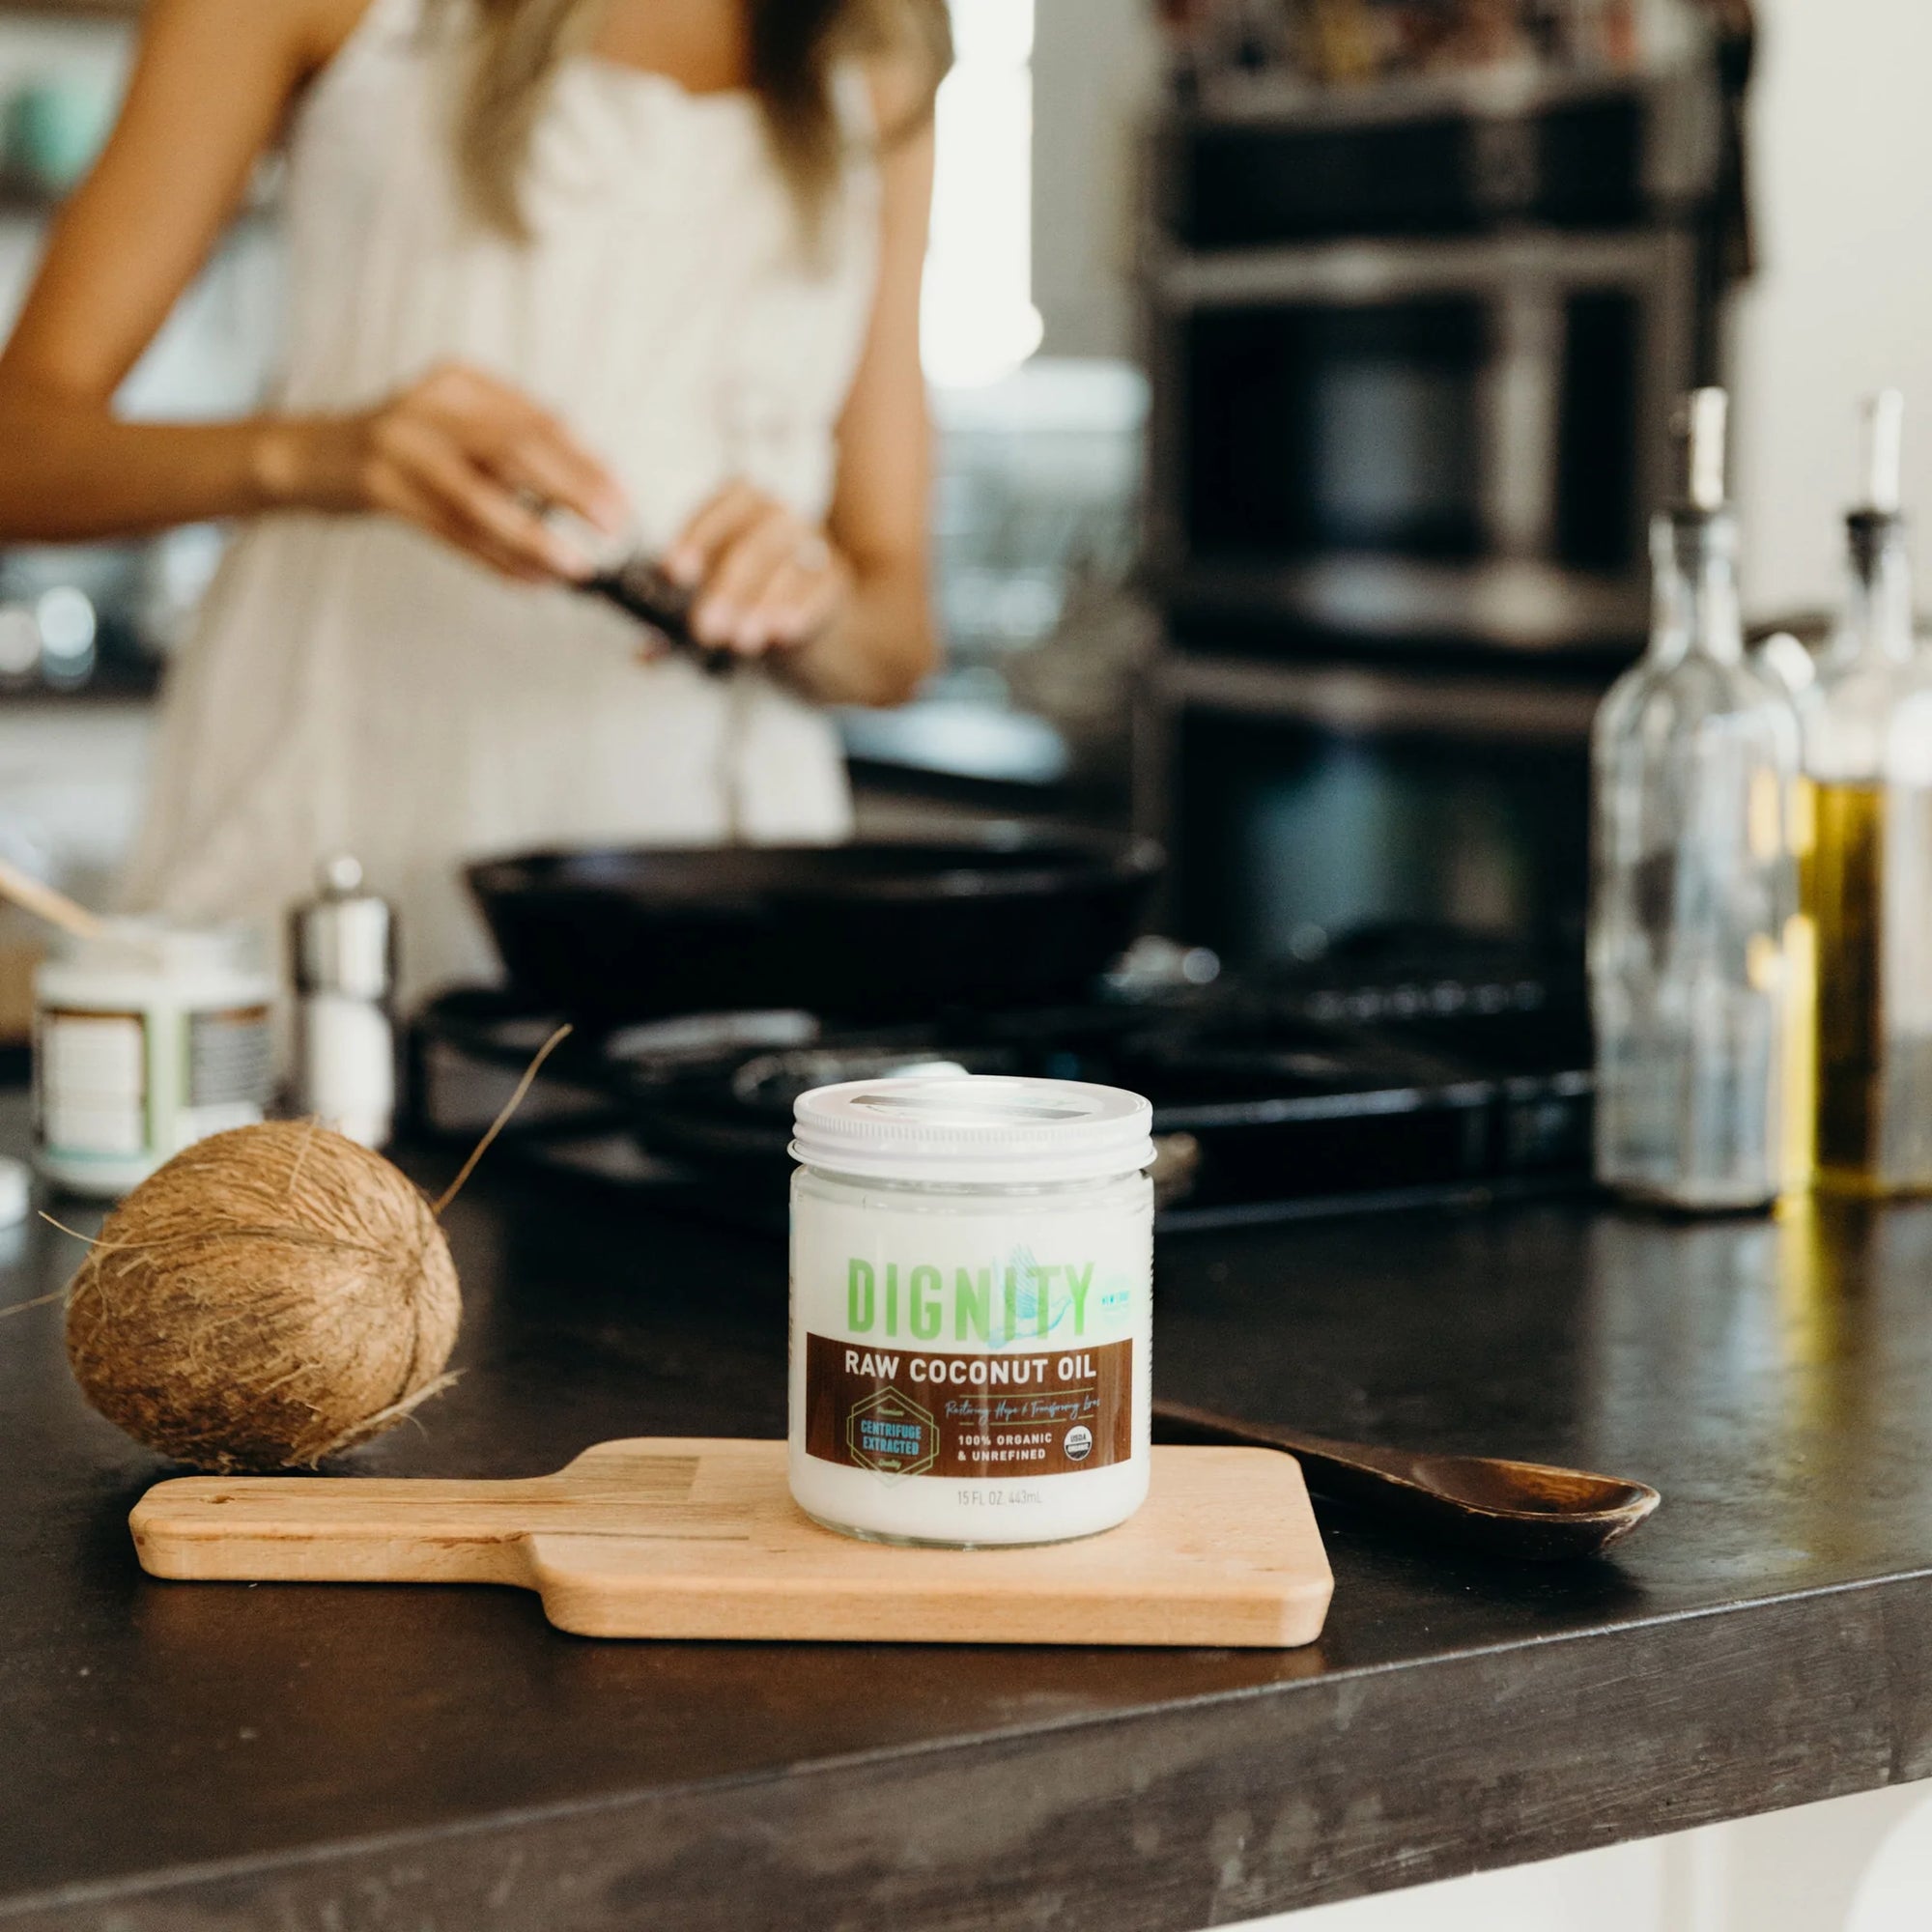 Can you cook with coconut oil?